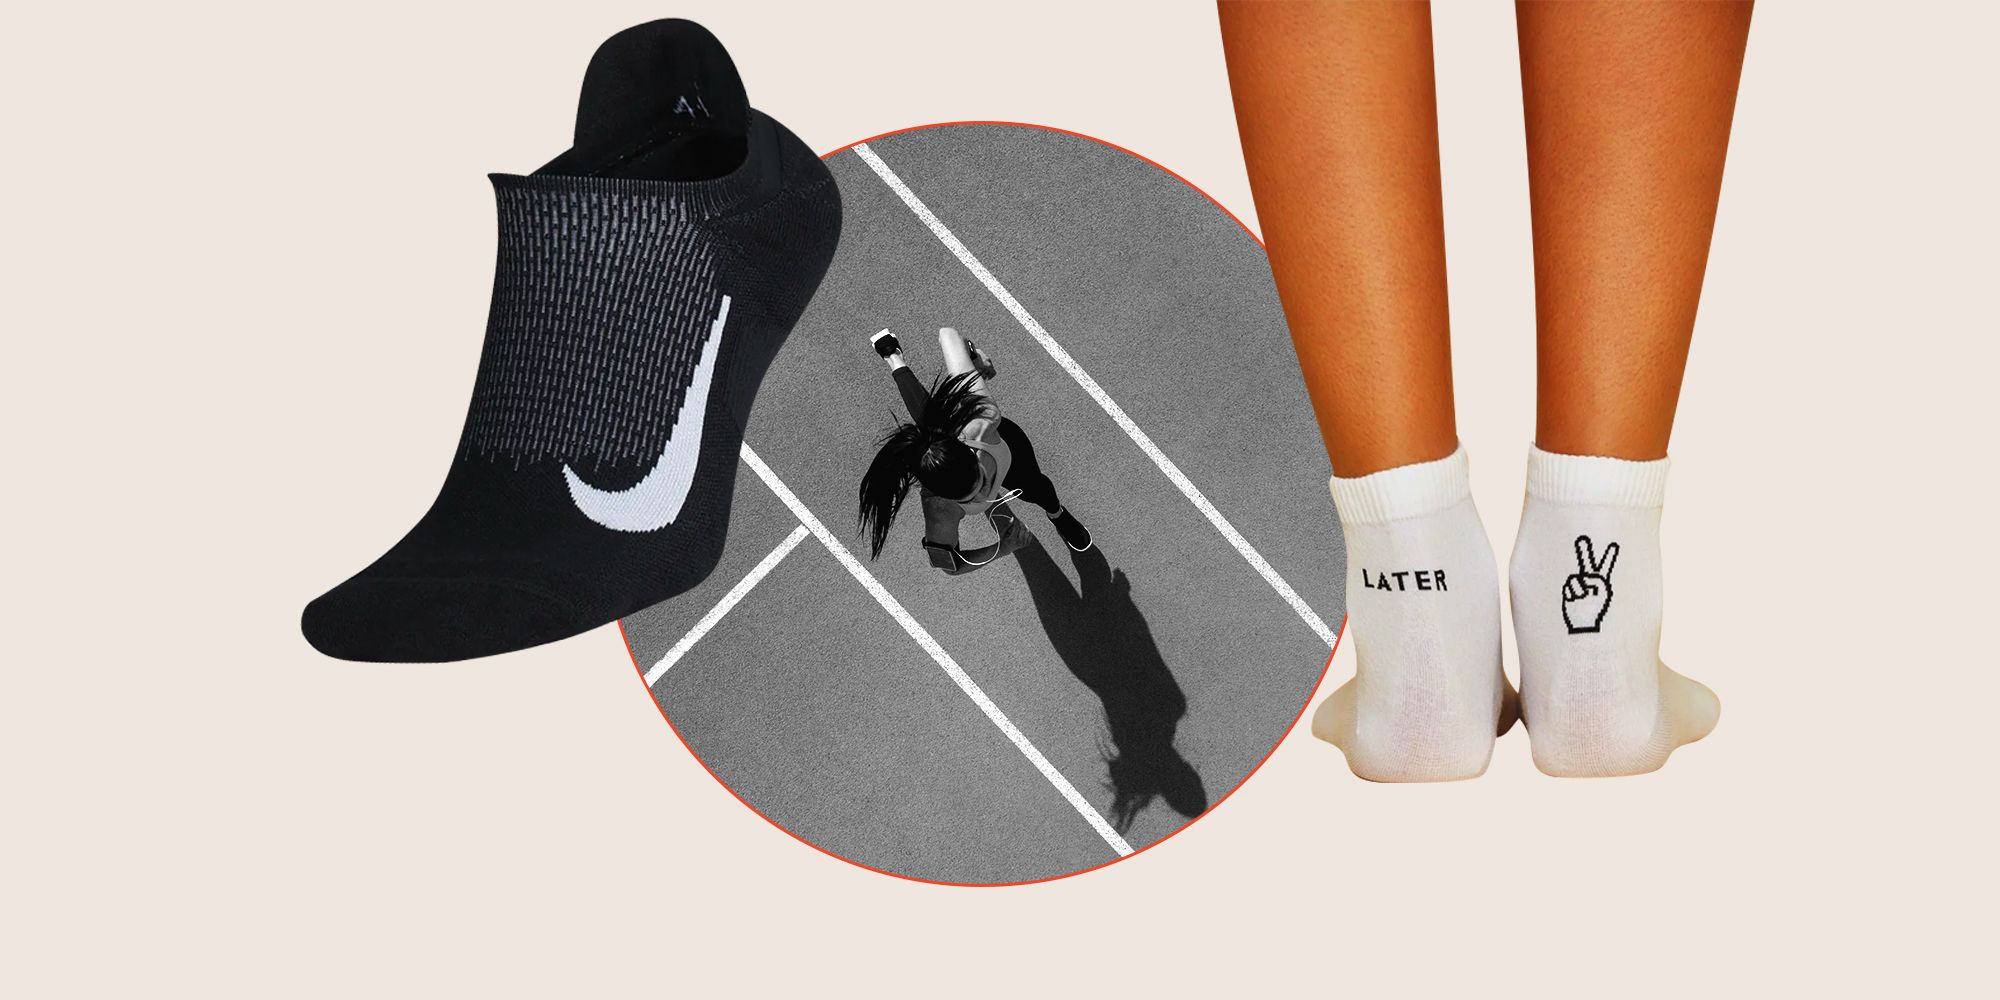 14 Pairs of Running Socks So Fancy They 